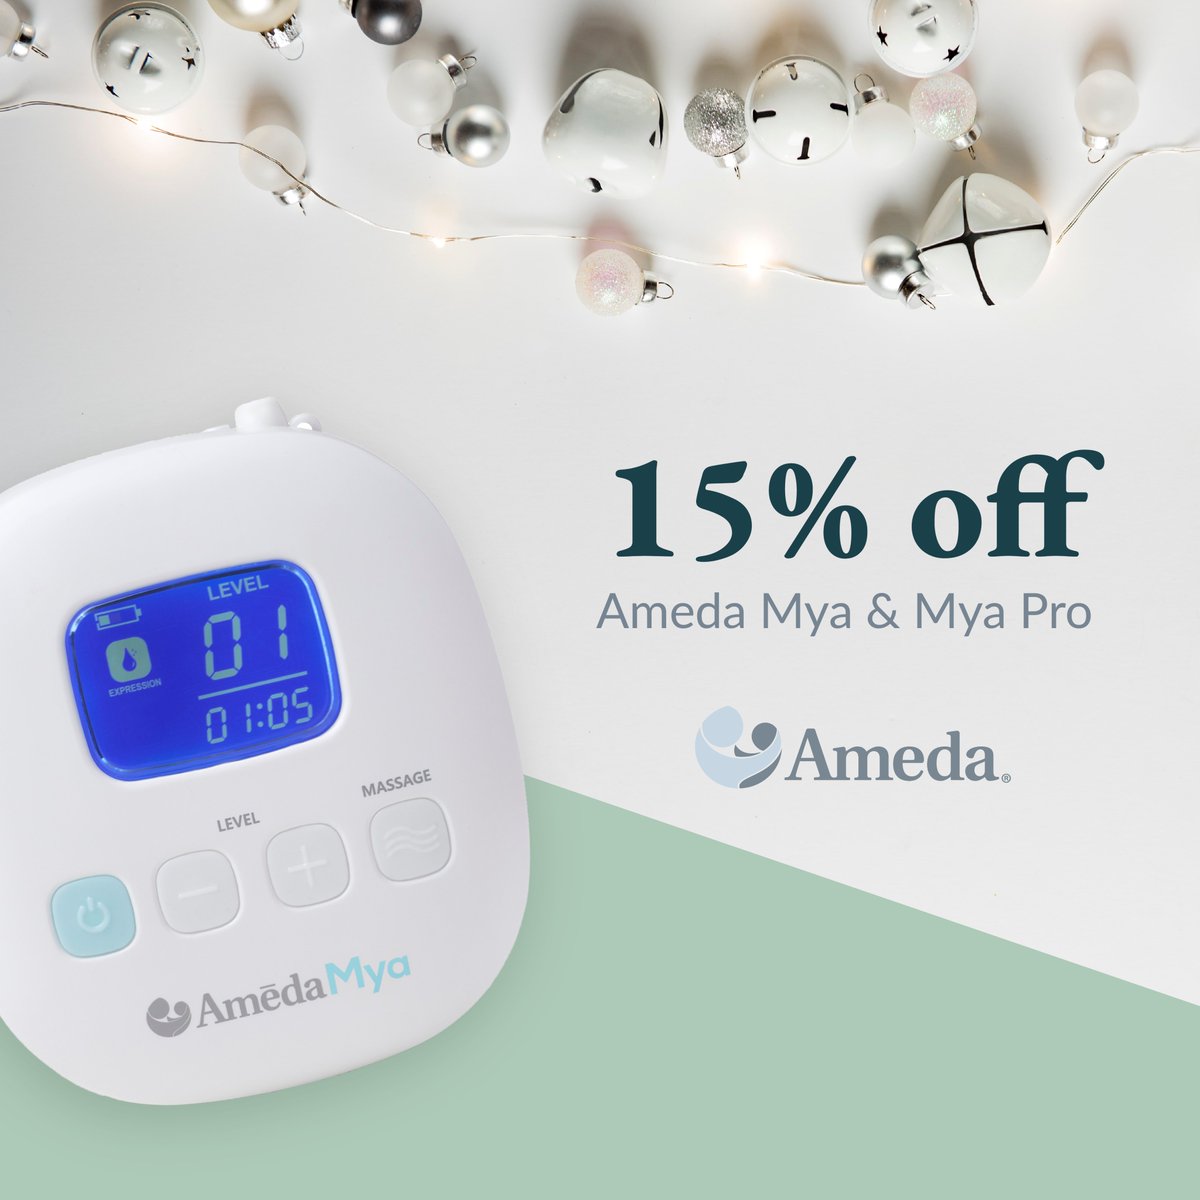 New Year, new pump! Give the Ameda Mya or Mya Pro a try while they're 15% off through January 1, and see the Ameda Difference for yourself. Shop now: ameda.com/products/ #ameda #amedamom #breastpump #pumpmilk #pumpingbreastmilk #breastmilk #newmom